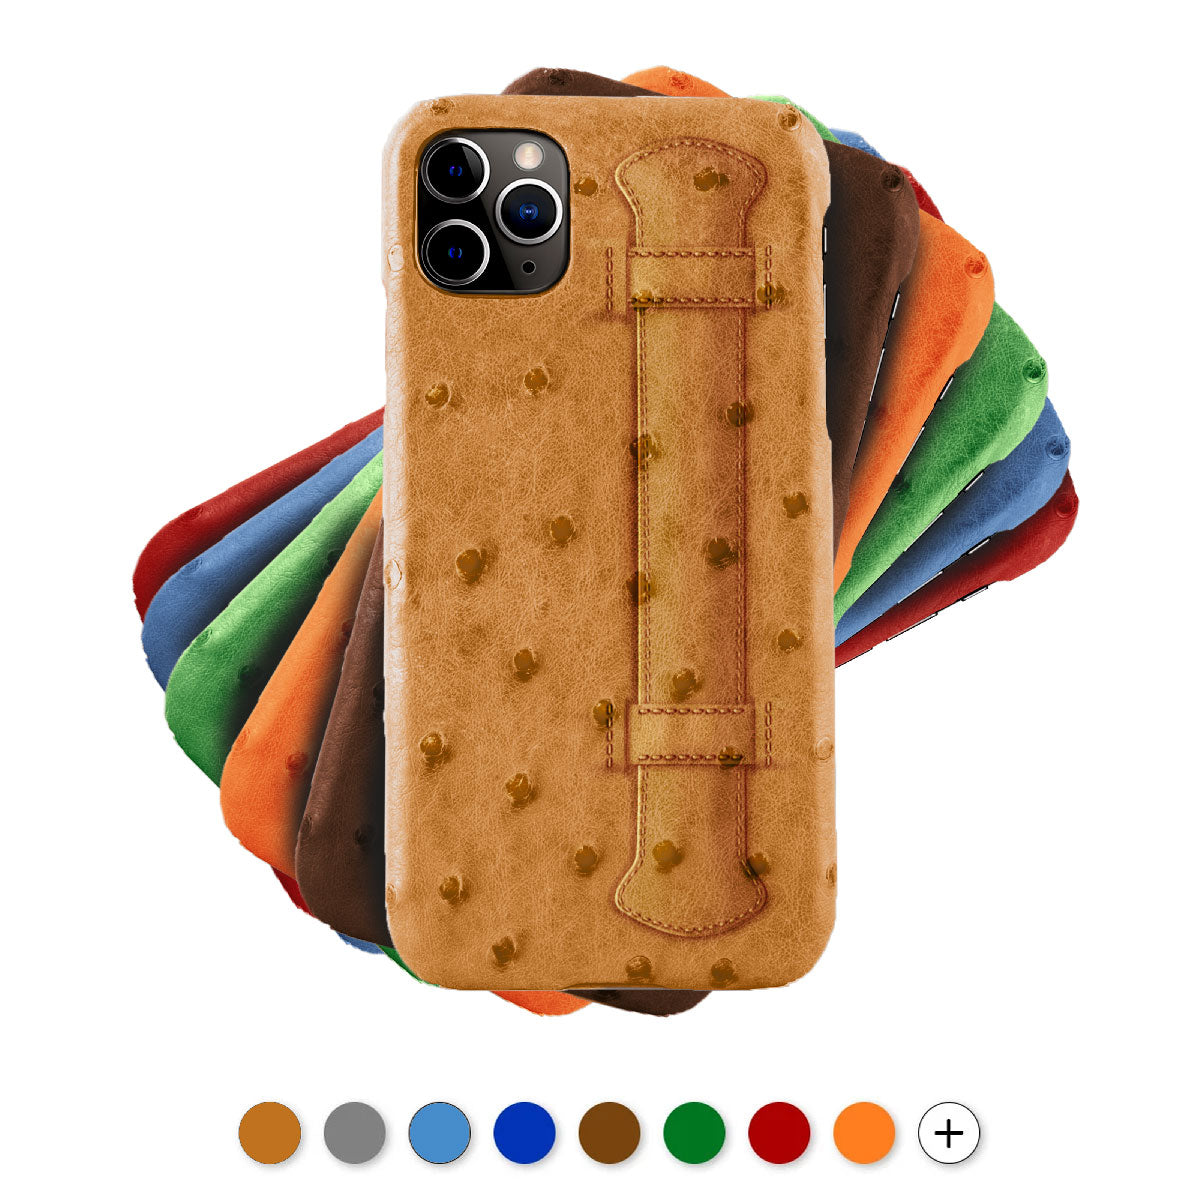 Leather iPhone  Strap case  with handle - iPhone 12 & 11 ( Pro / Max /  Mini ) - Ostrich leather , brown , orange , blue , grey